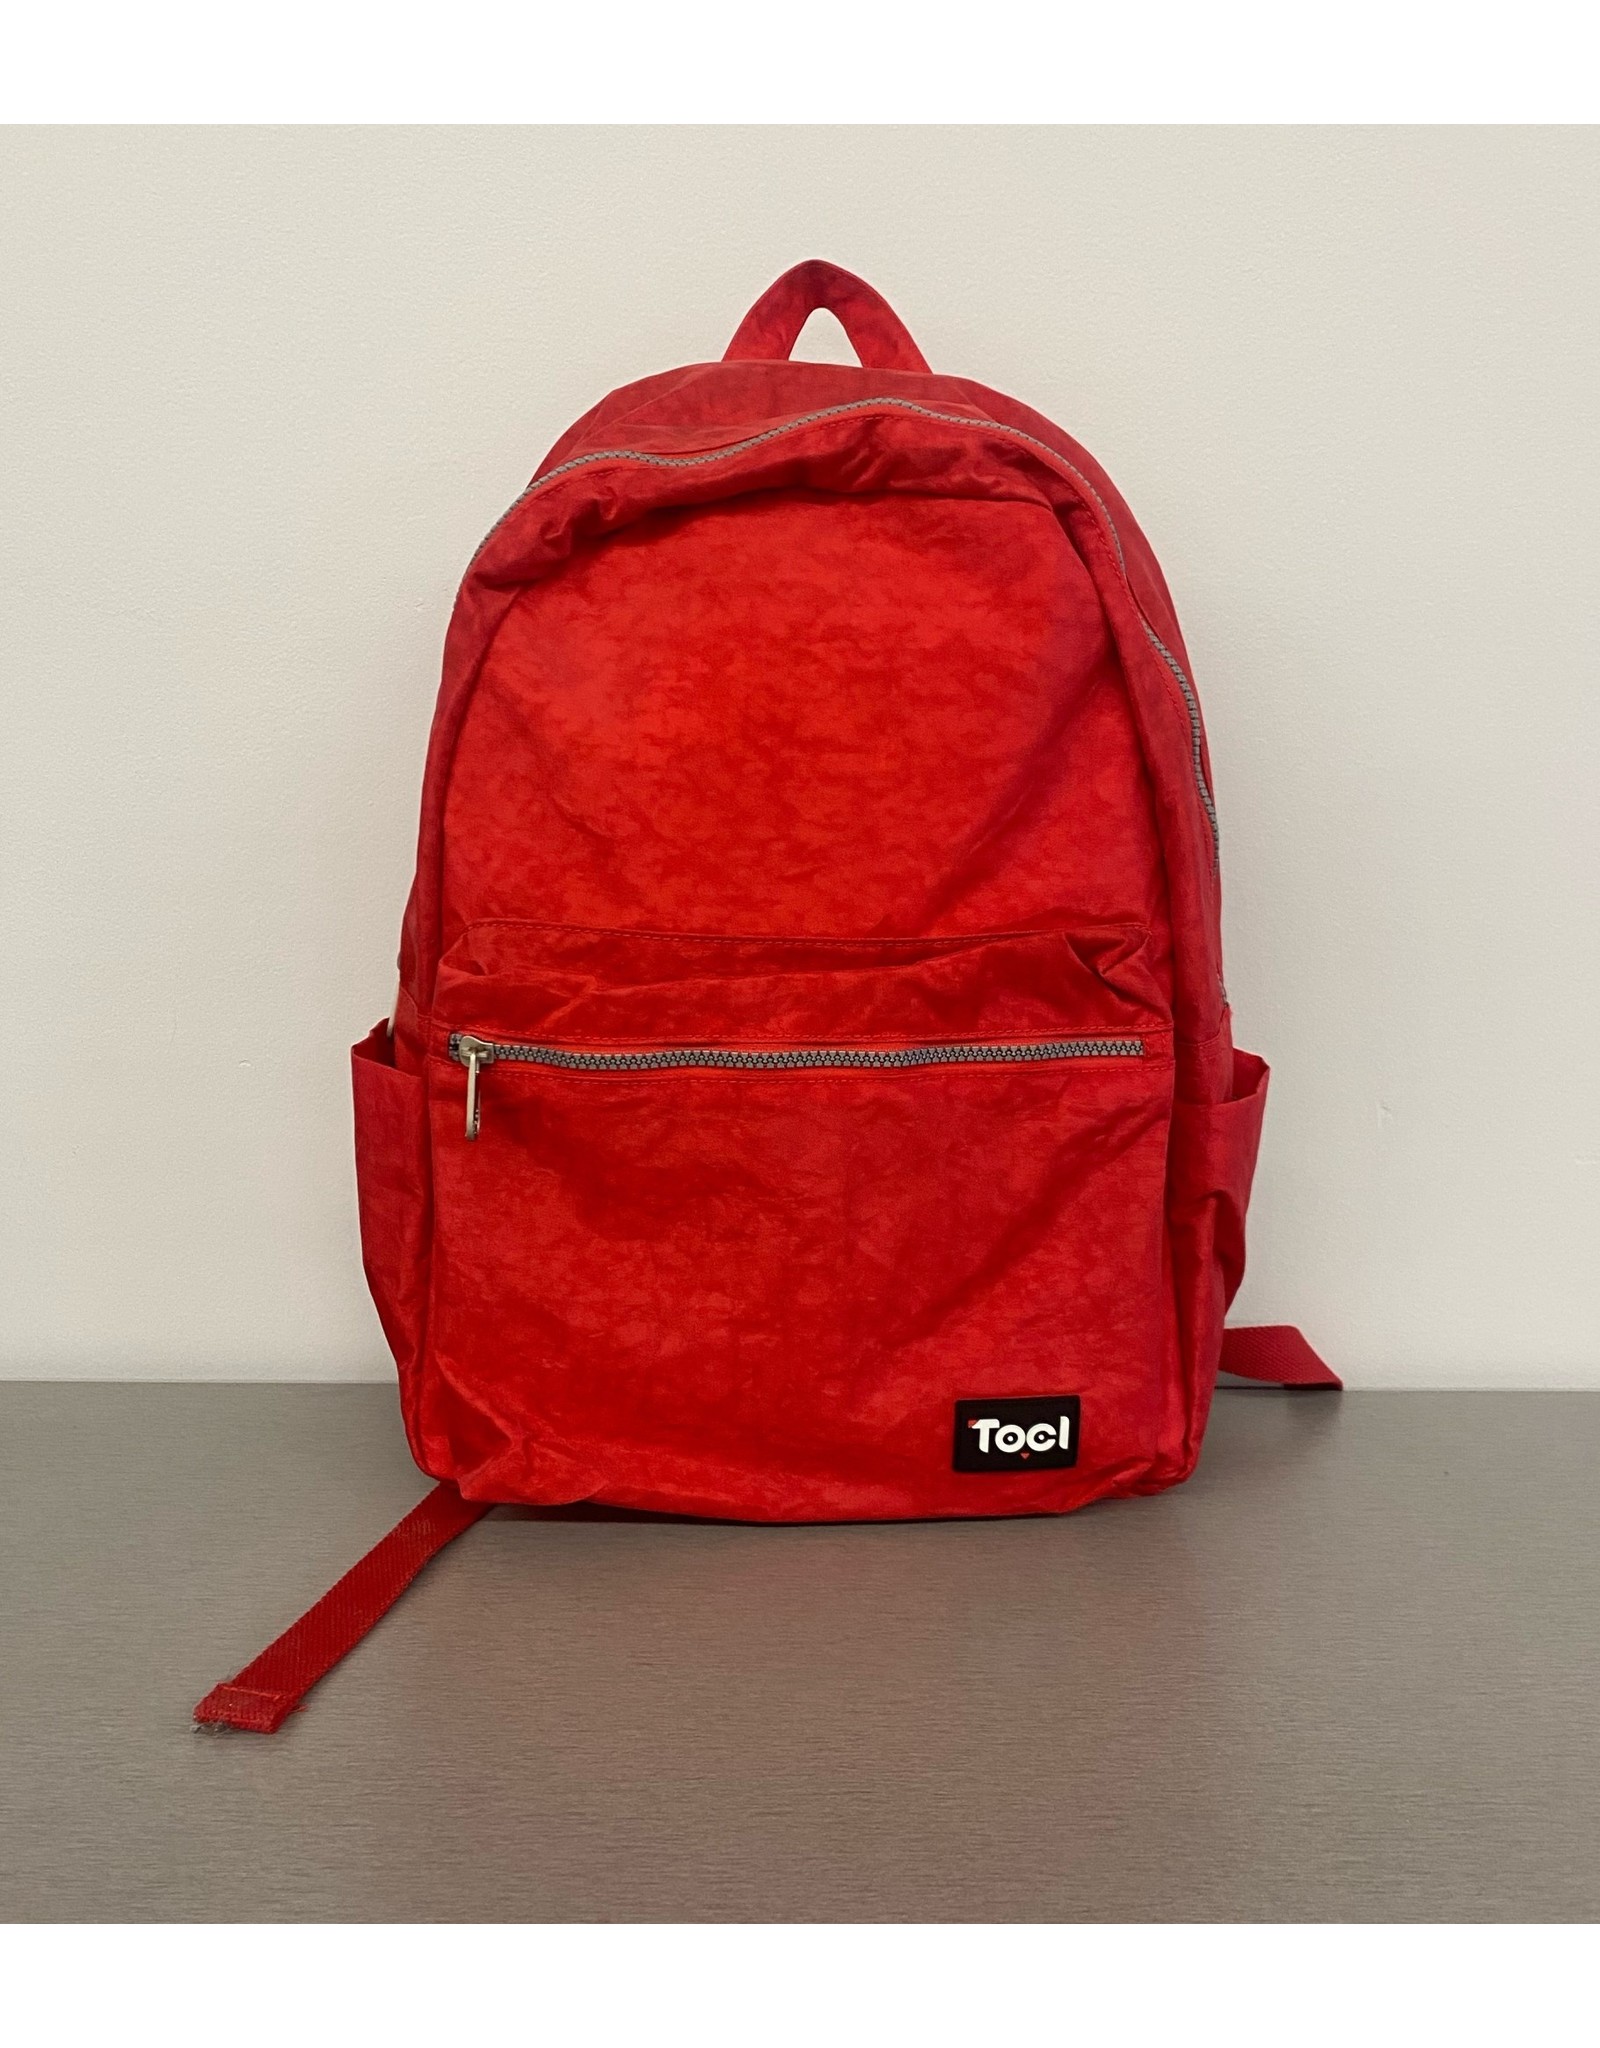 Toci - Solid Red Backpack